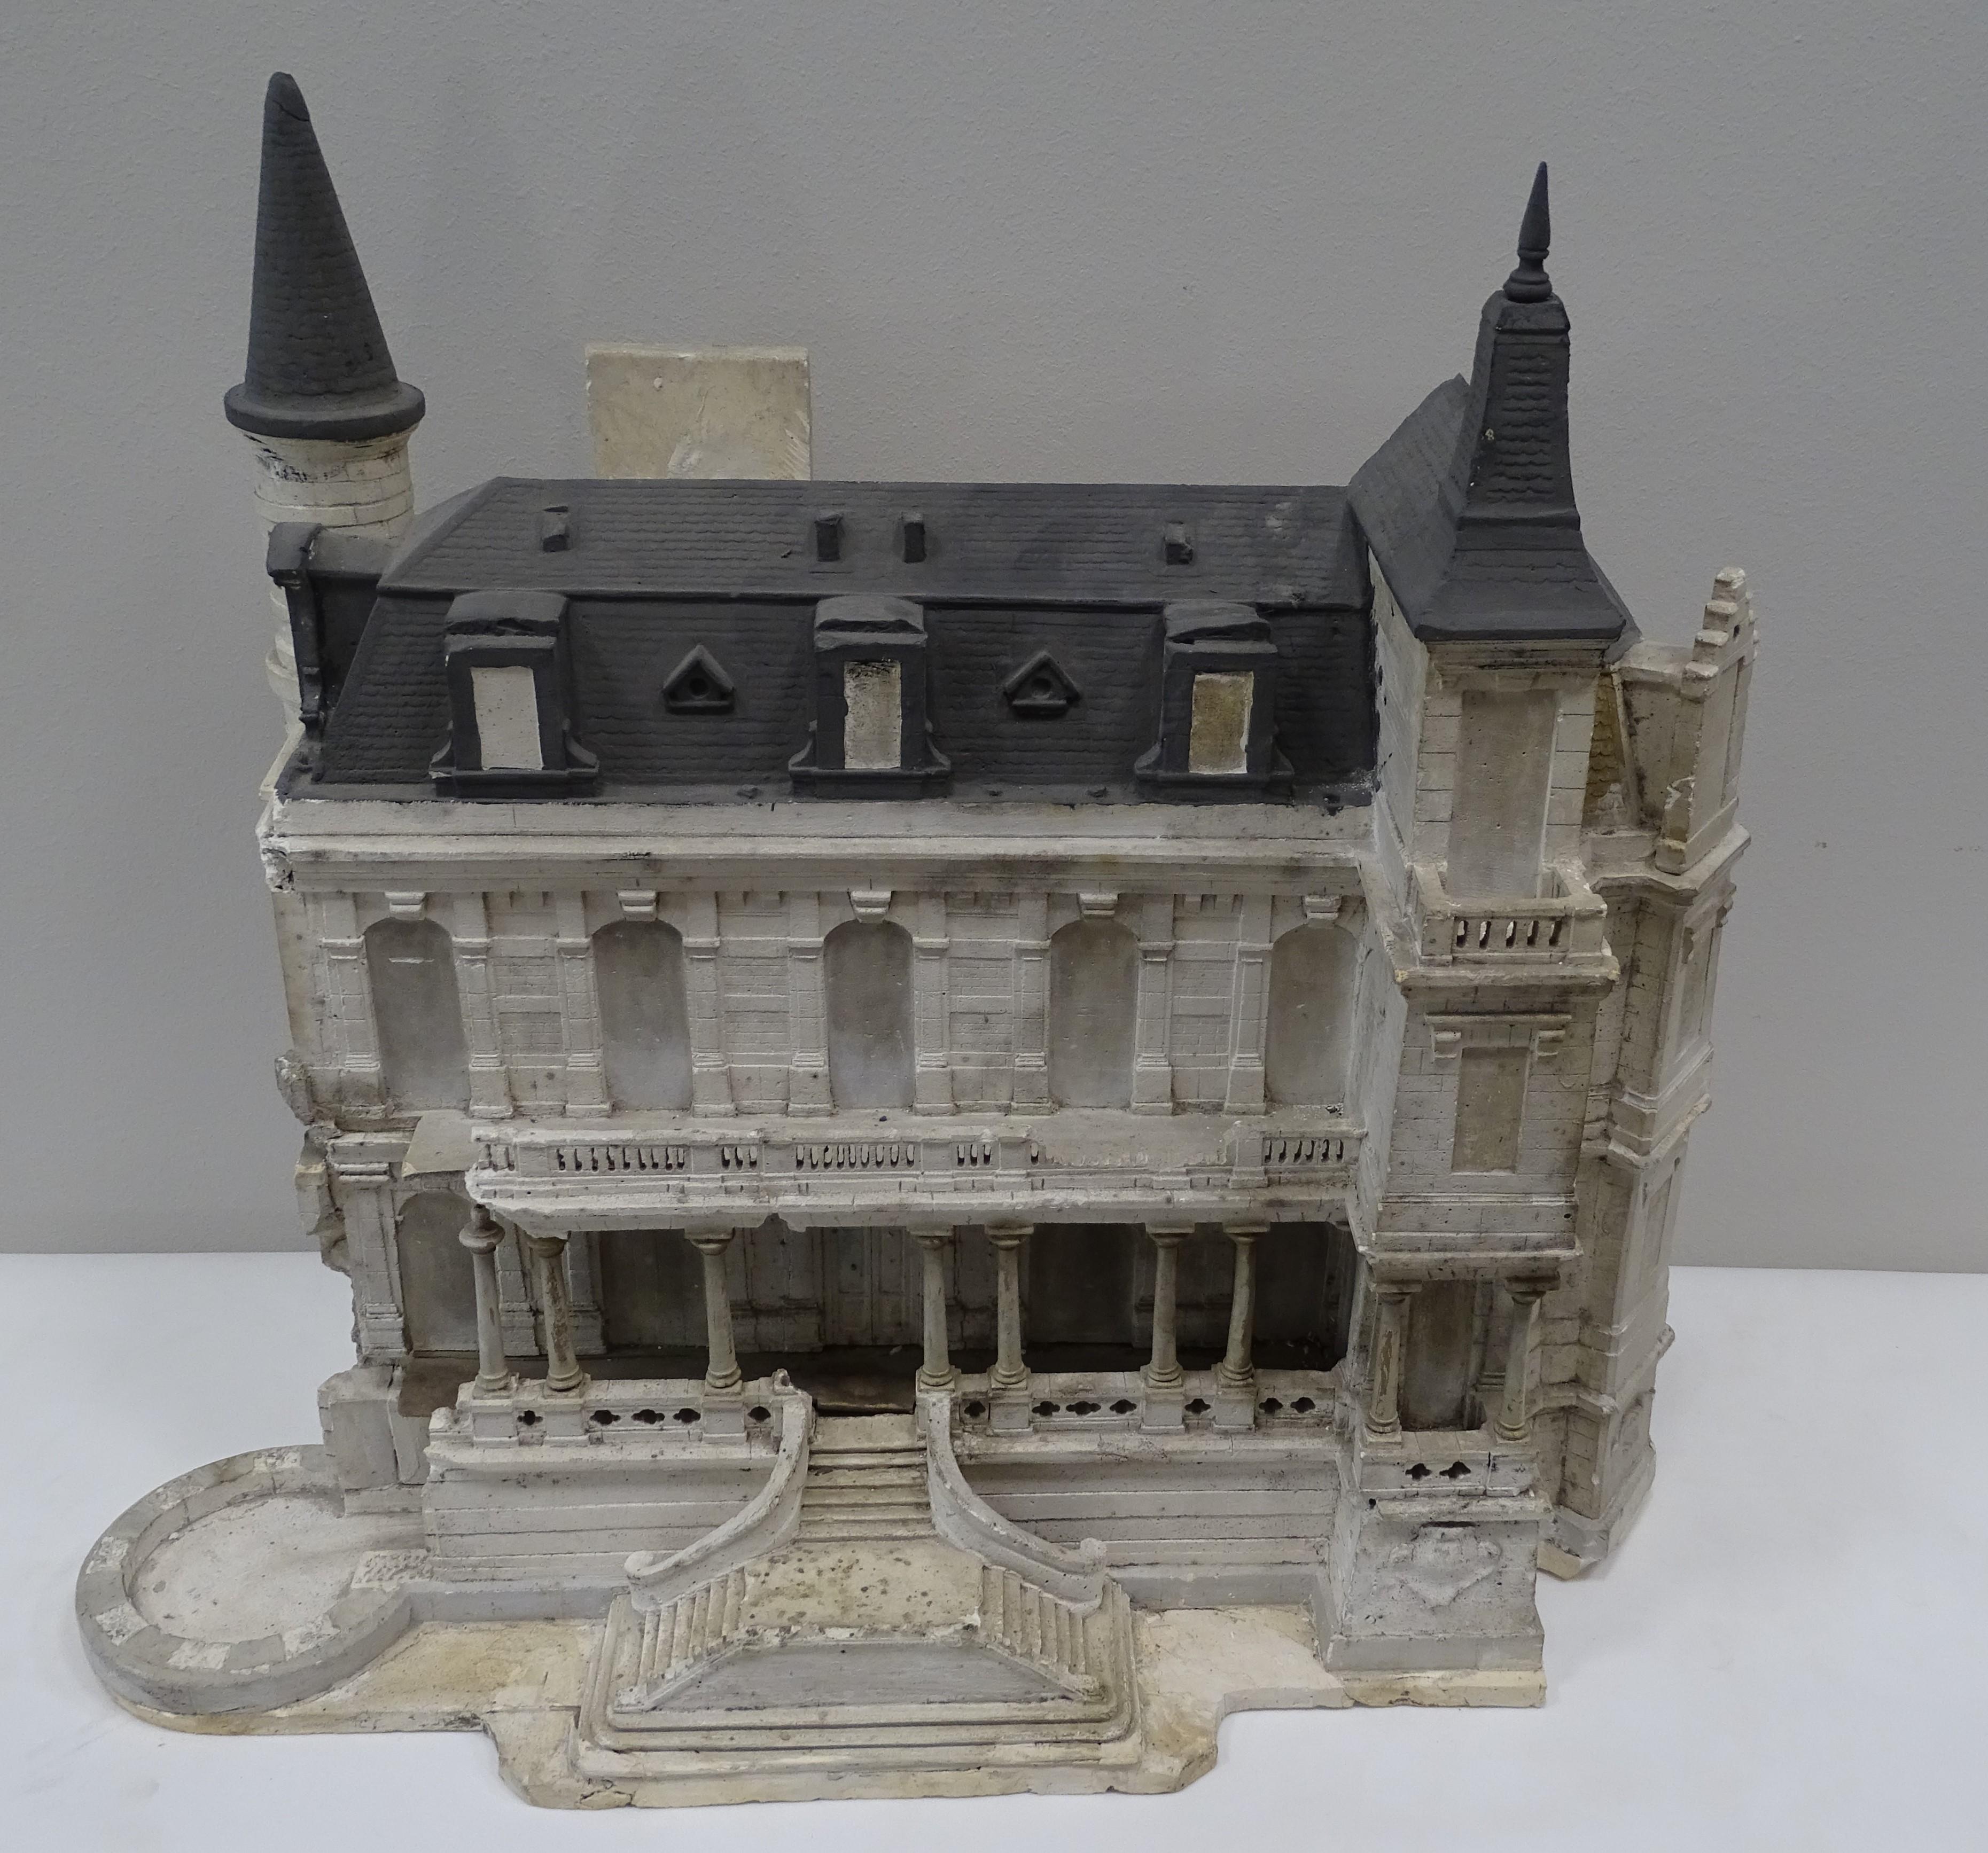 Hand-Crafted 19th Century French Plaster Sculpture Chateau Castle Model